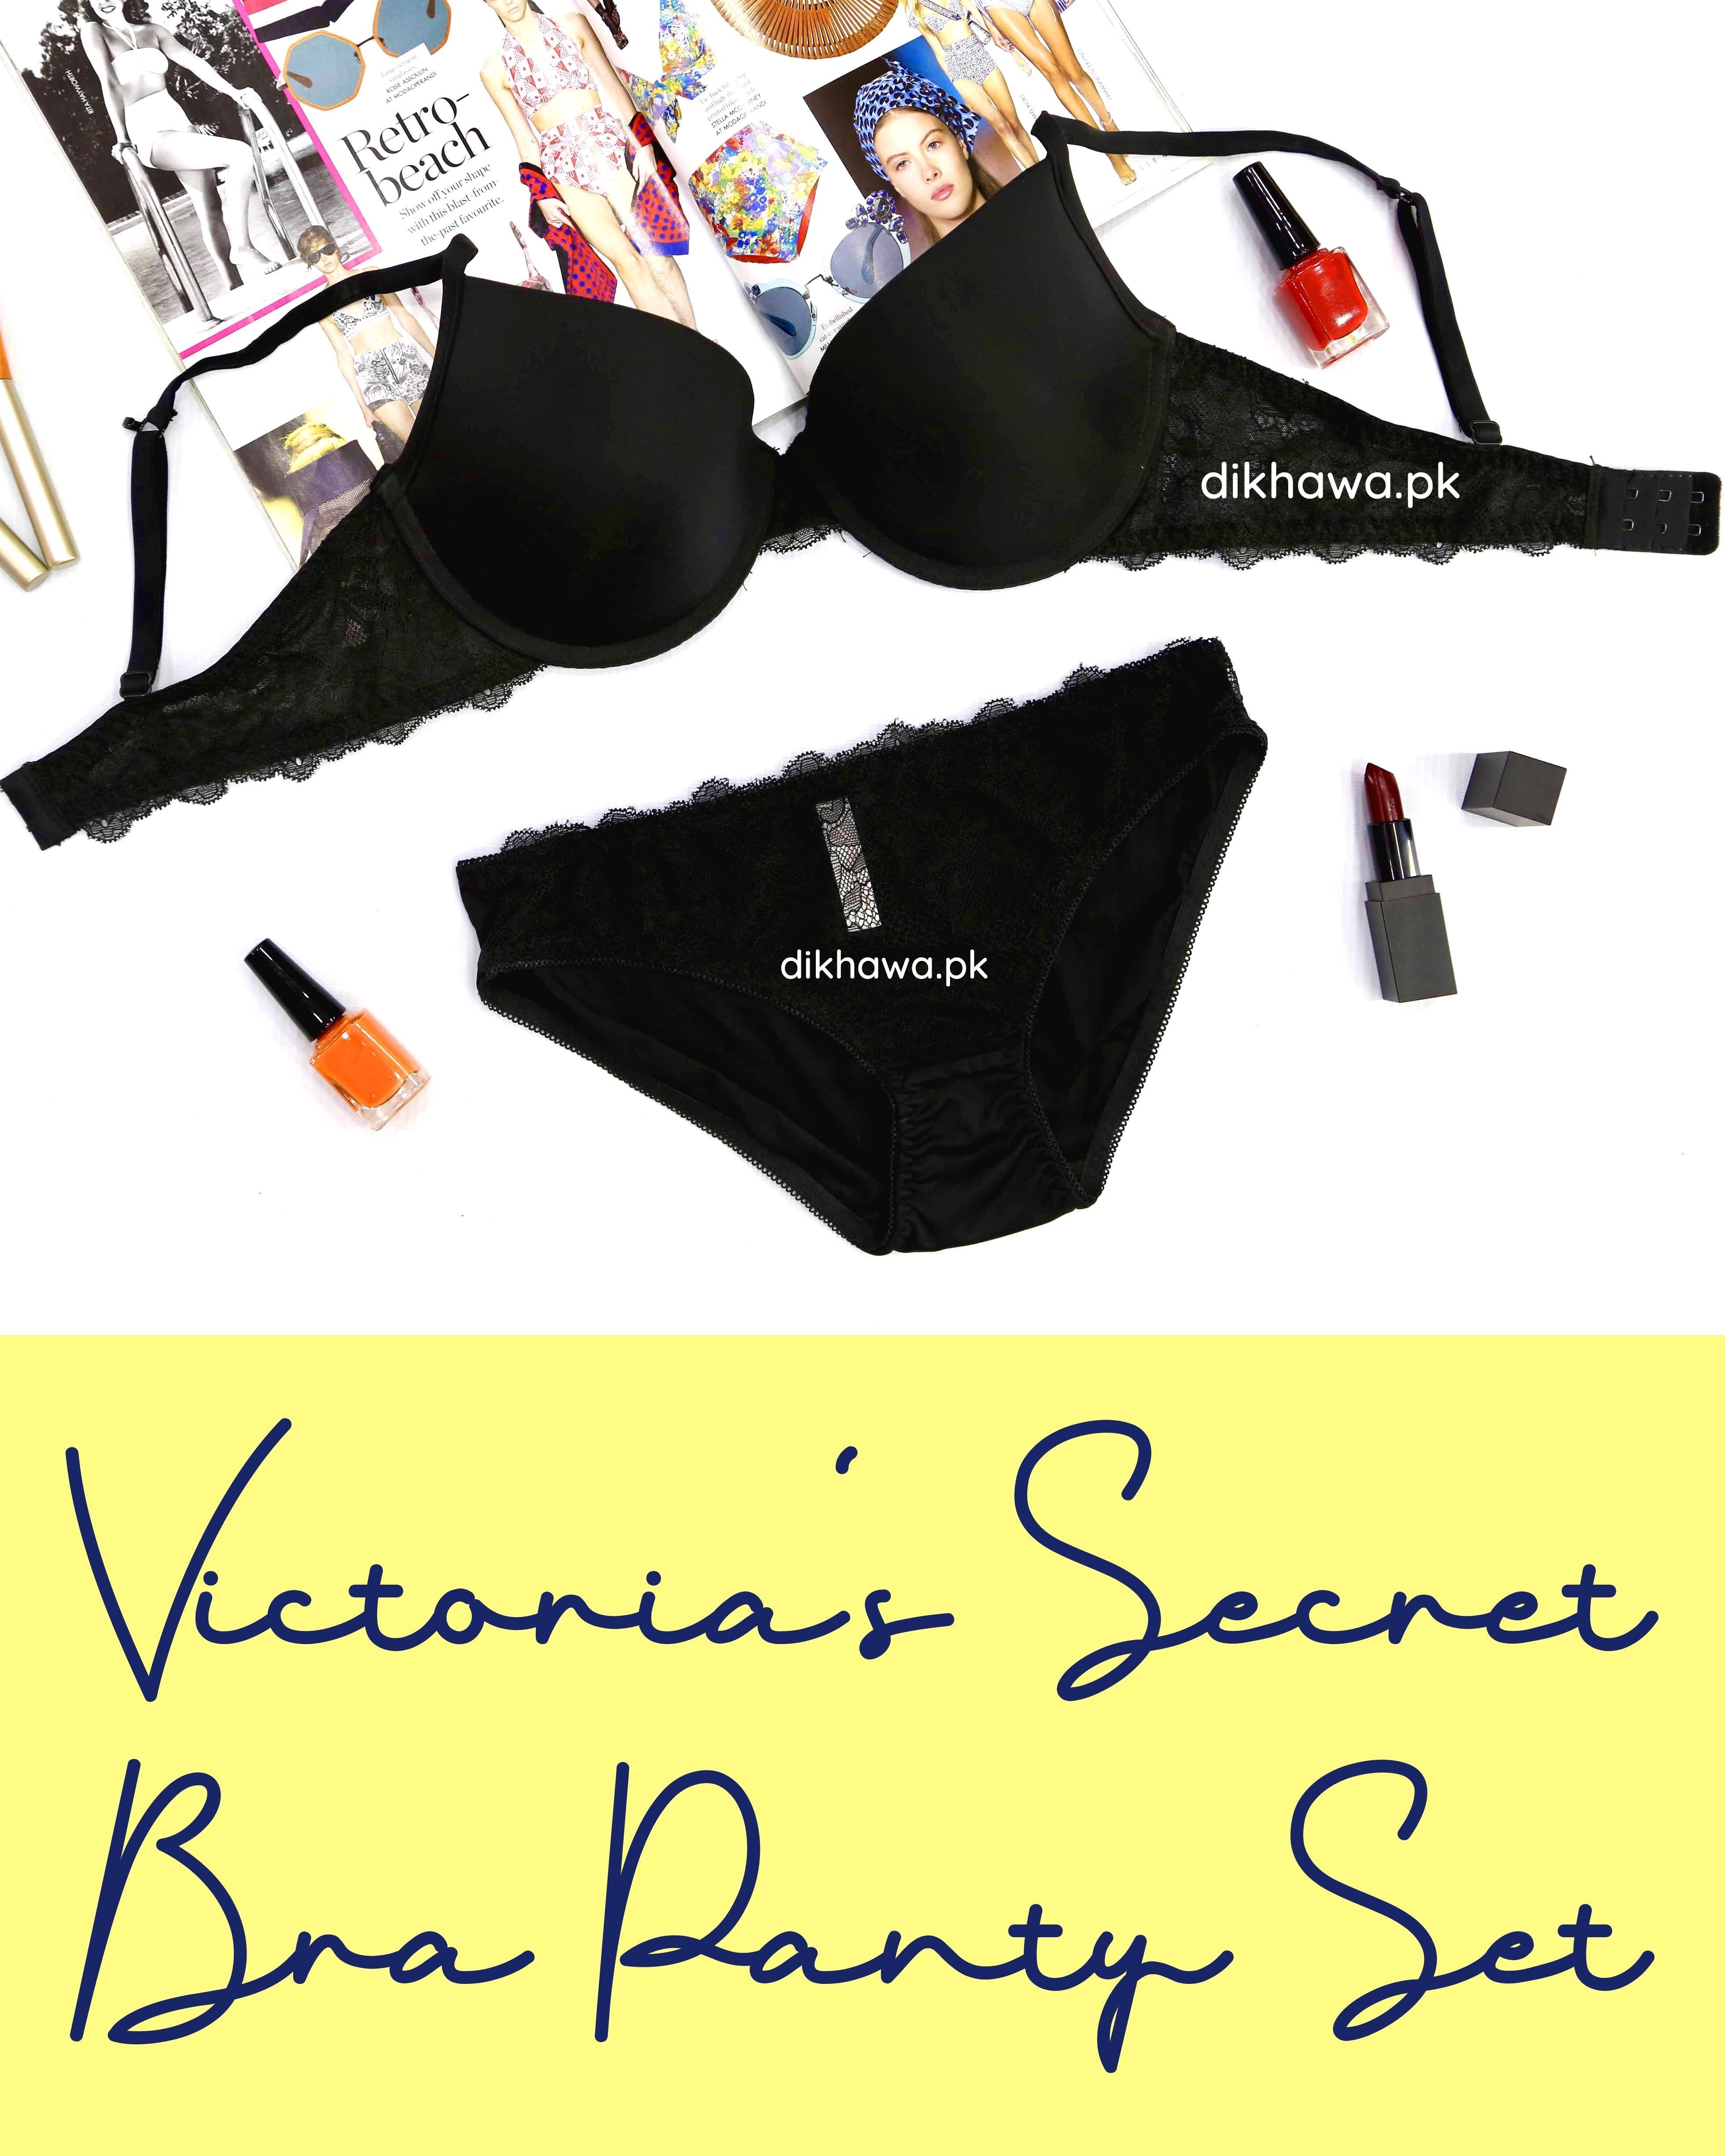 Victoria's Secret - Pink Single Padded Pushup Bra And Panty Set - Online  Shopping in Pakistan - Online Shopping in Pakistan - NIGHTYnight